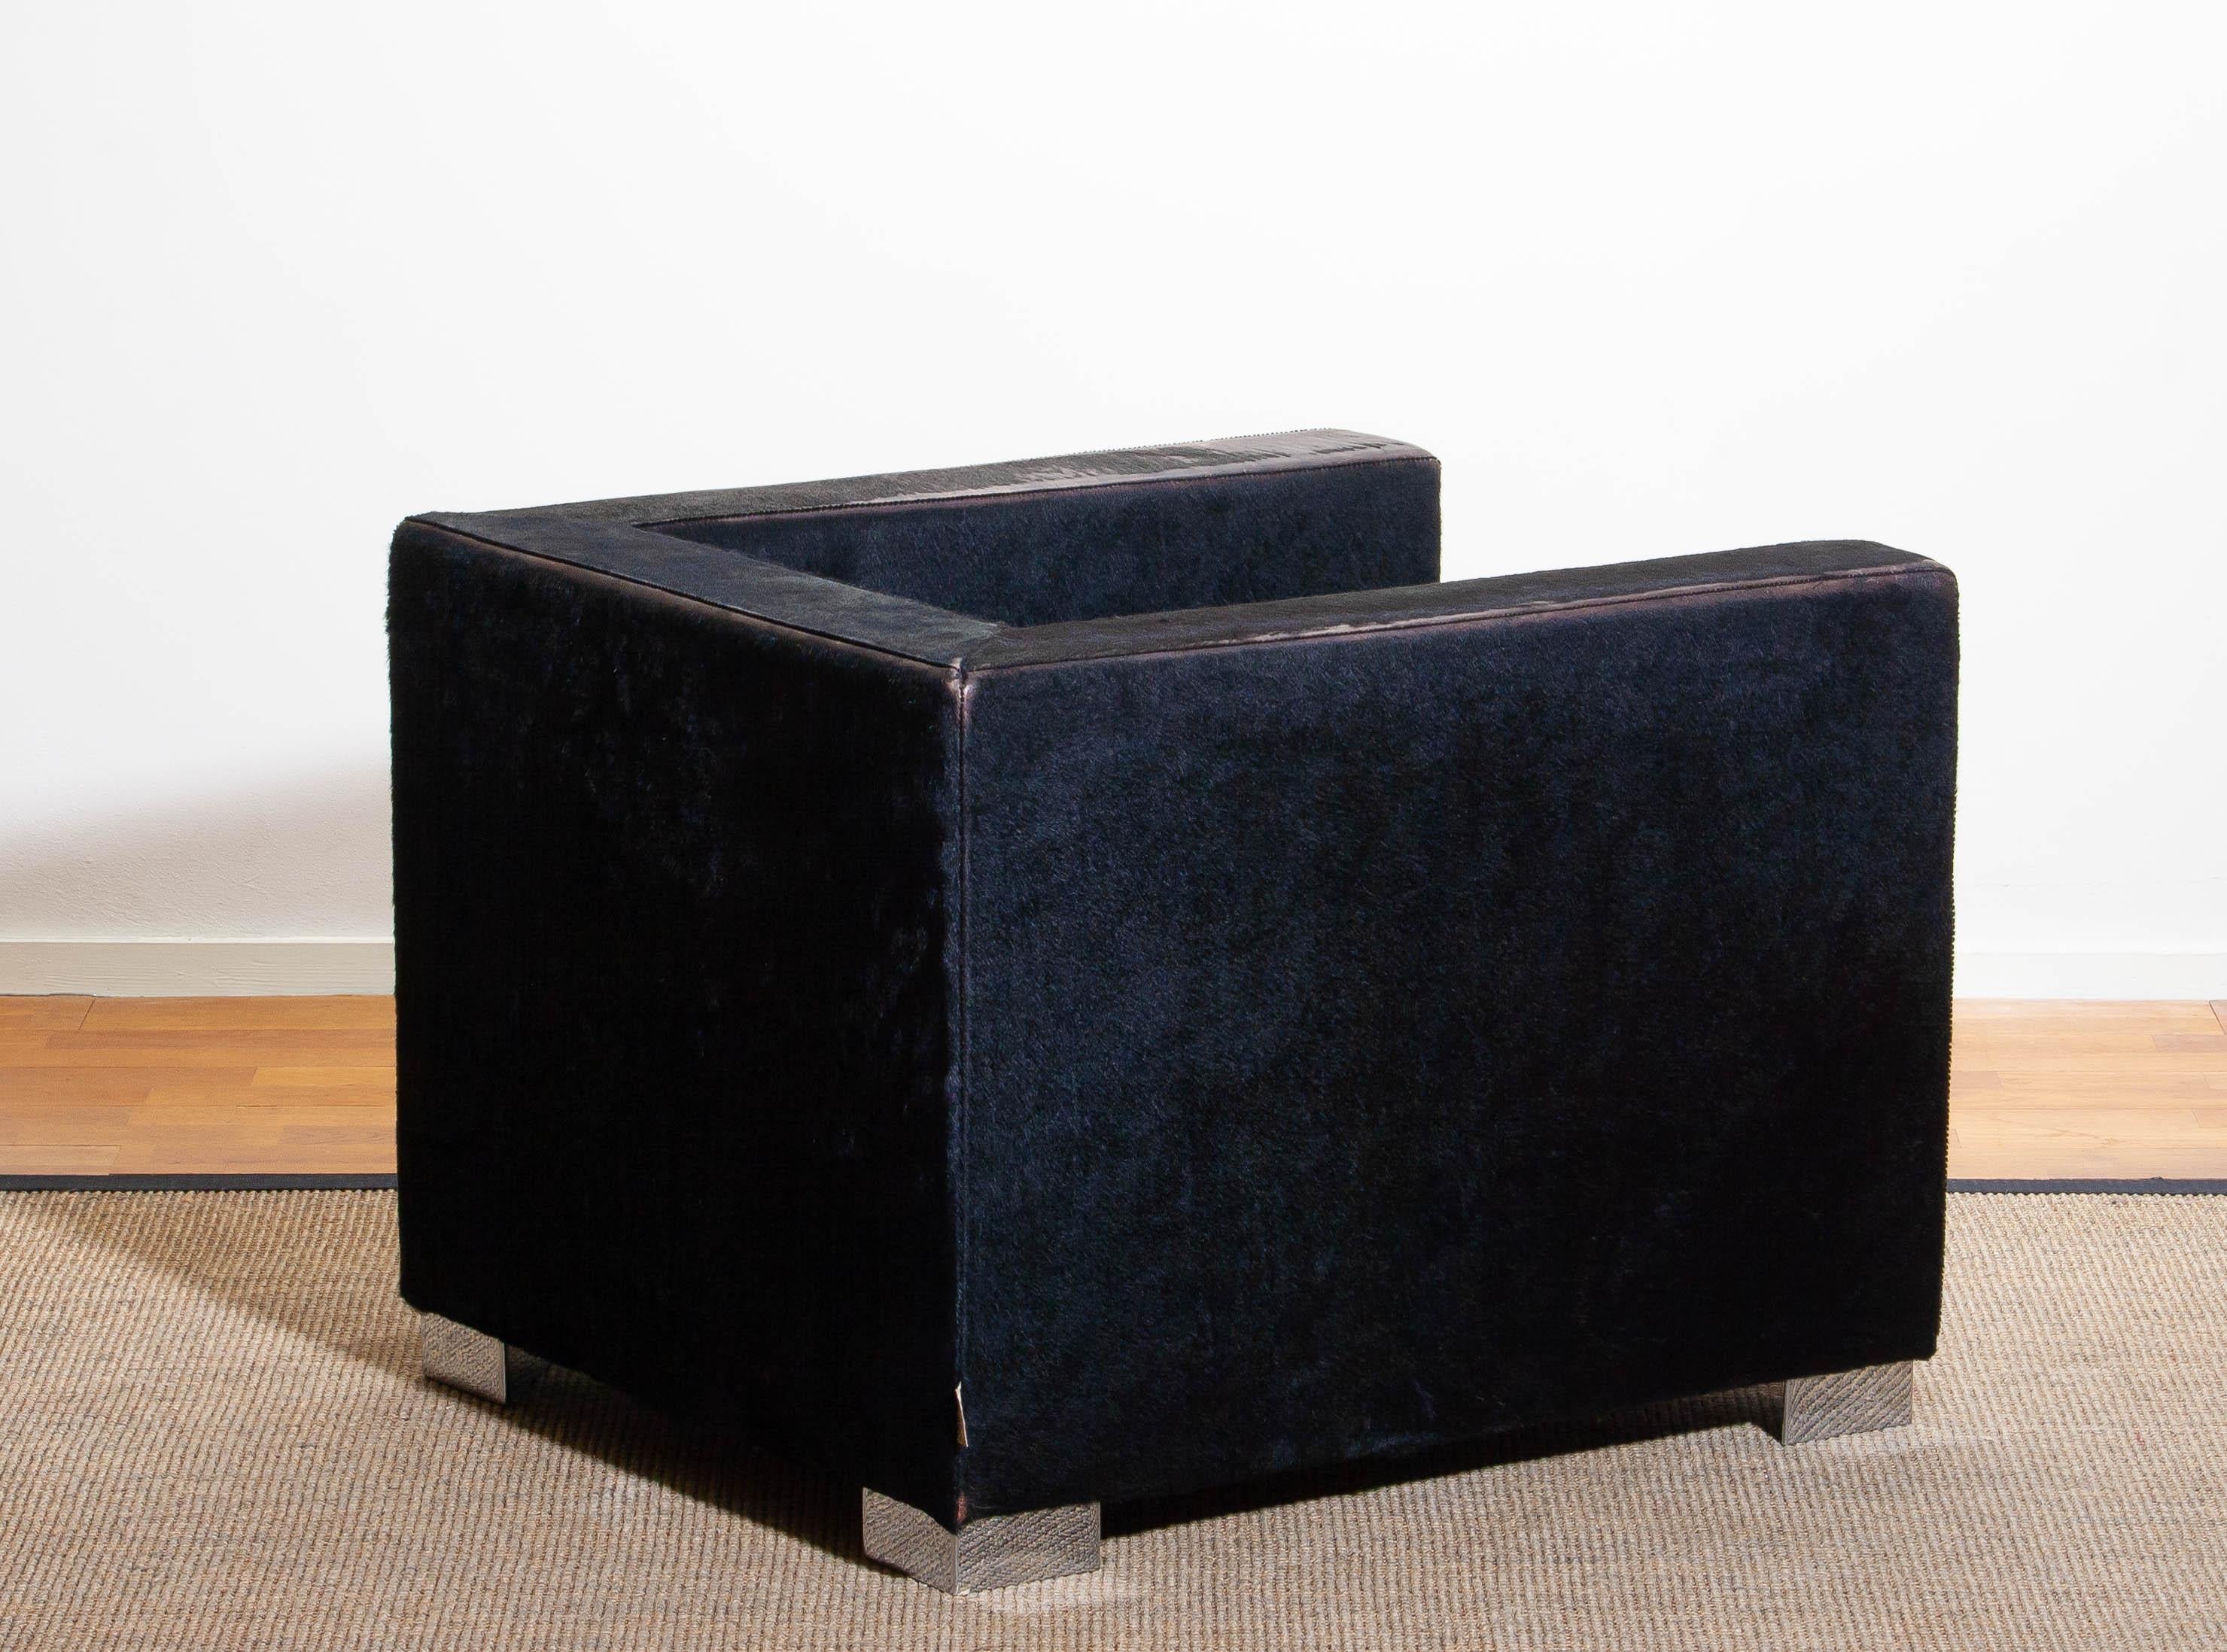 1990s, Black Lounge Chair in Pony and Leather by Rodolfo Dordoni for Minotti im Zustand „Gut“ in Silvolde, Gelderland